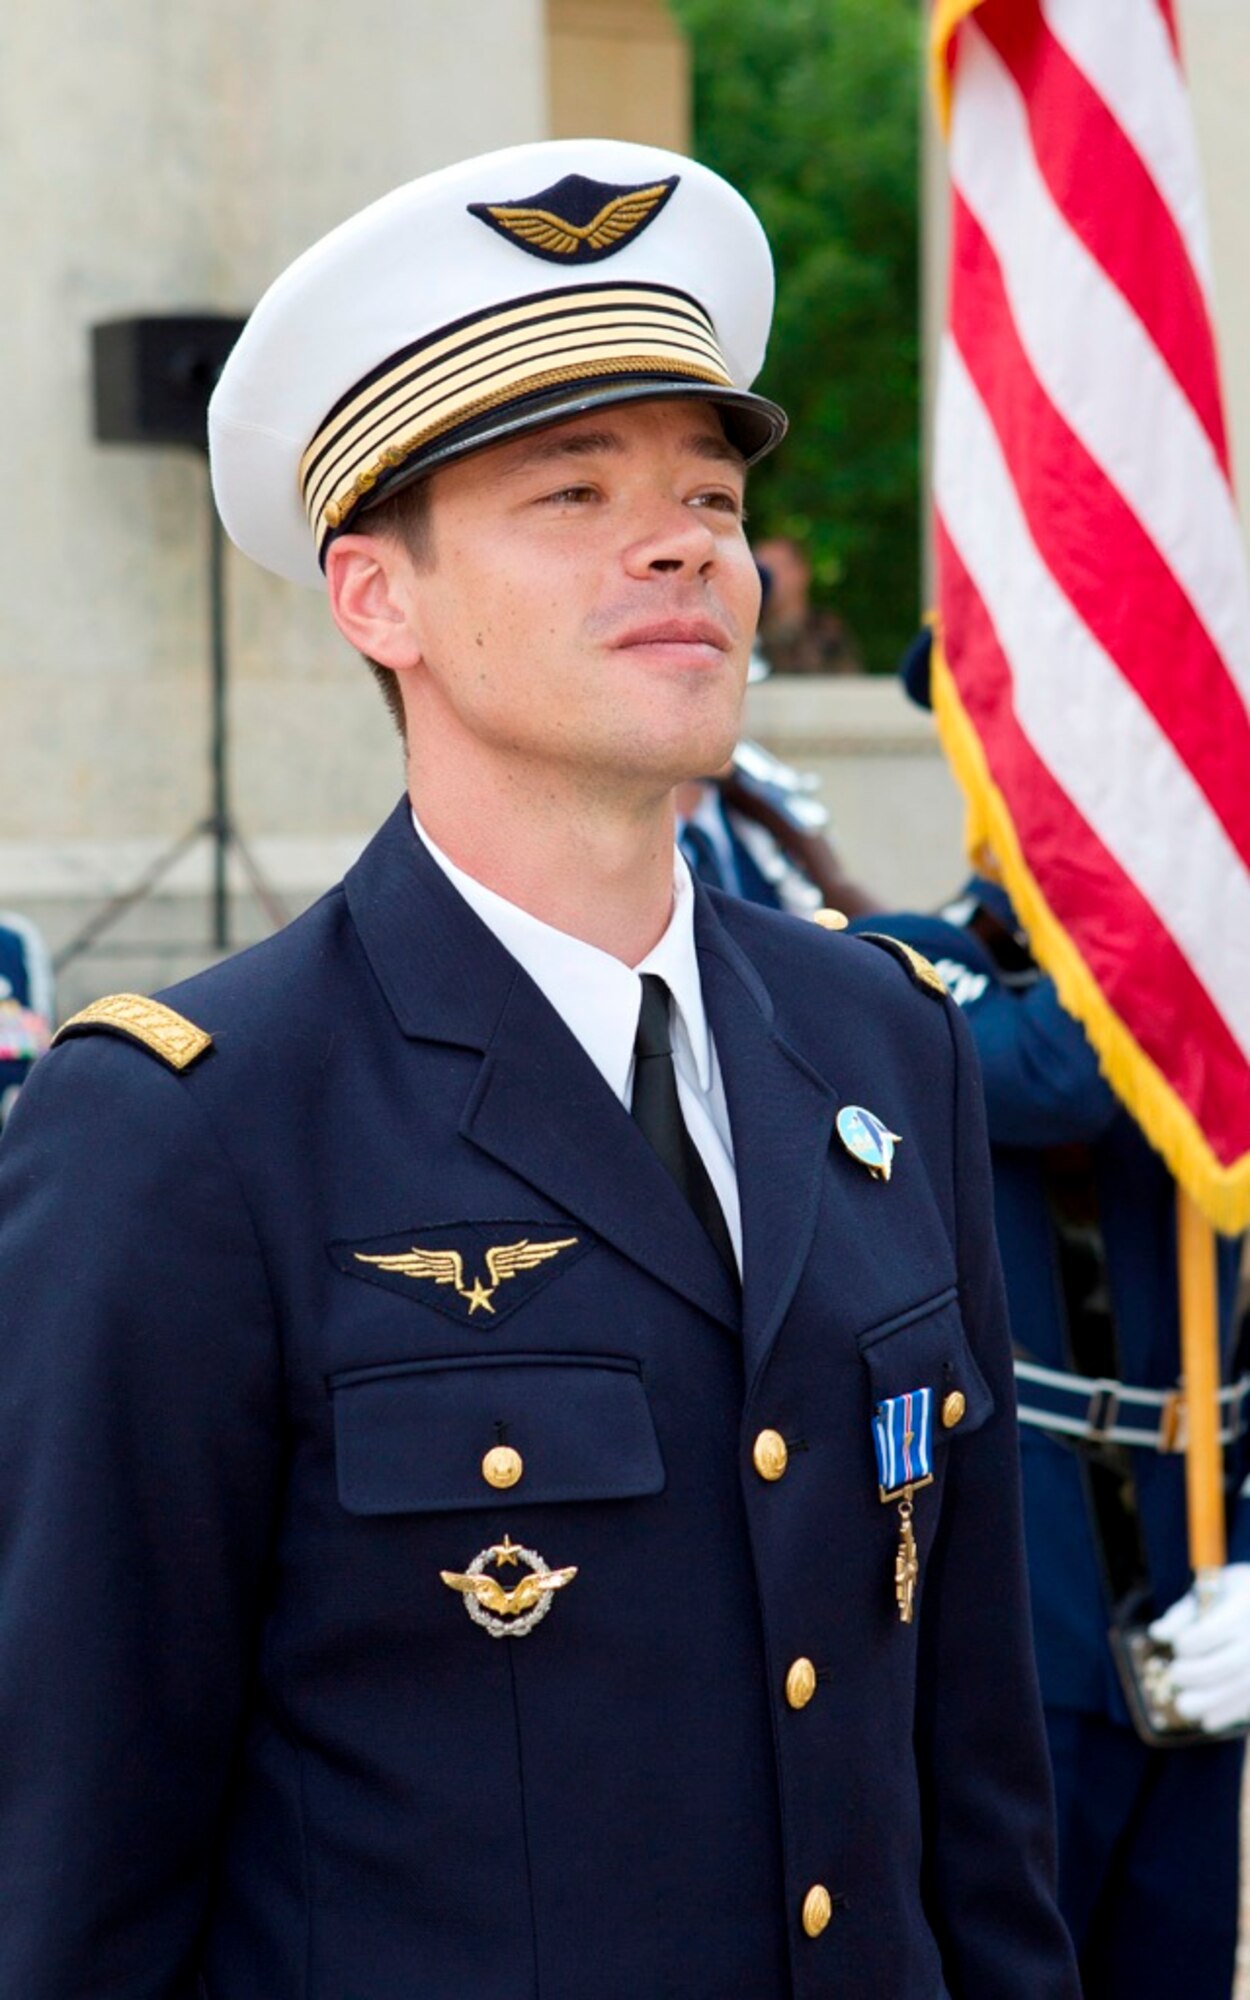 French air force Maj. Guillaume Vernet shows his pride after receiving the Distinguished Flying Cross with Valor from Air Force Chief of Staff Gen. Norton Schwartz July 13, 2011, at the Lafayette Escadrille Memorial in Marnes-la-Coquette, France. Vernet was awarded the decoration for repeatedly flying into hostile territory in December 2009 while deployed to Afghanistan as an exchange officer with the 41st Rescue Squadron from Moody Air Force Base, Ga.  During that mission, Vernet rescued an urgent casualty whose injury put the lives of 160 British soldiers in jeopardy.  (Courtesy photo)